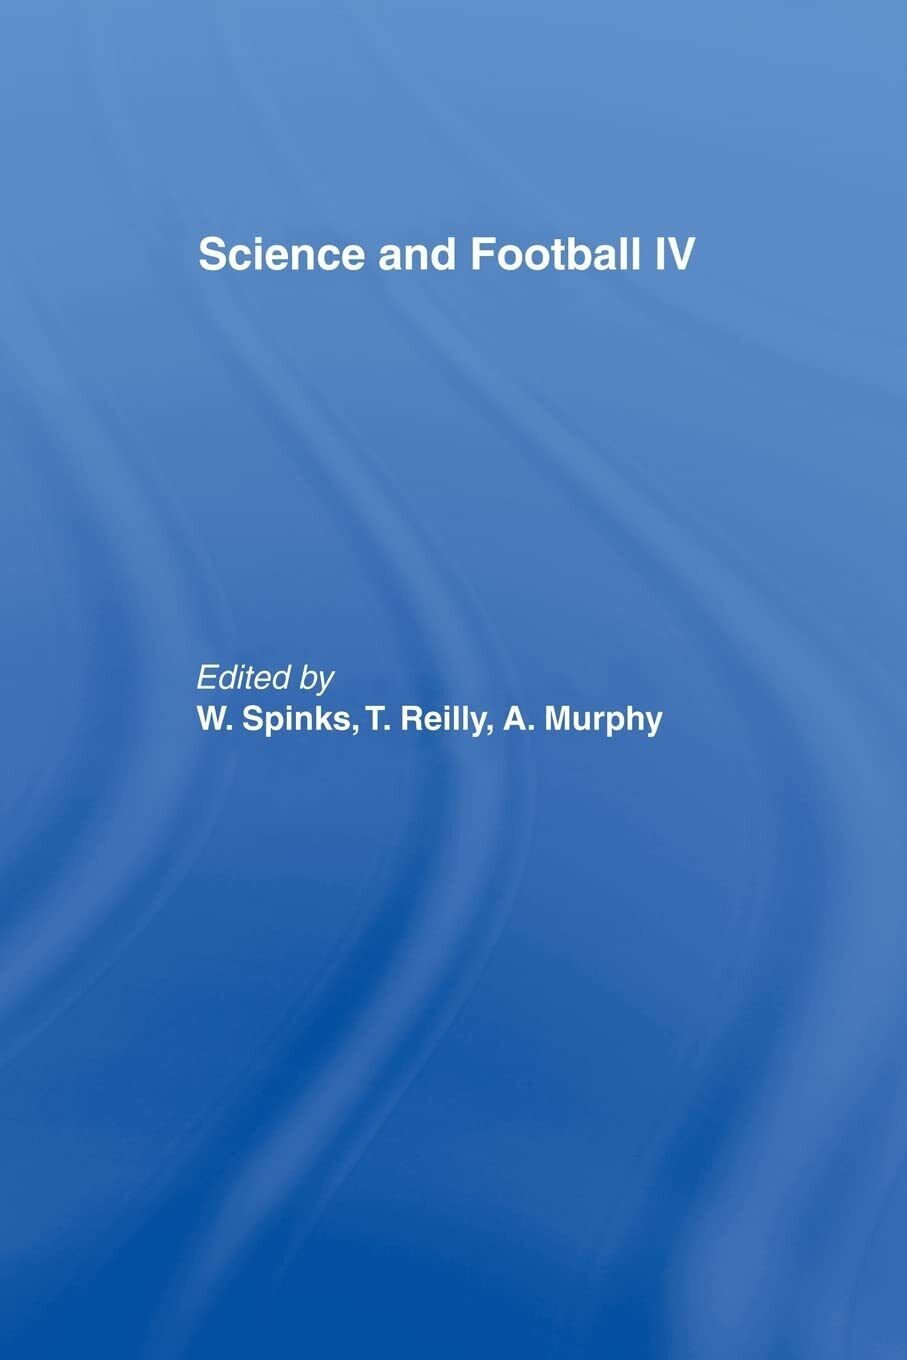 Science and Football IV - Warwick Spinks - Routledge, 2014